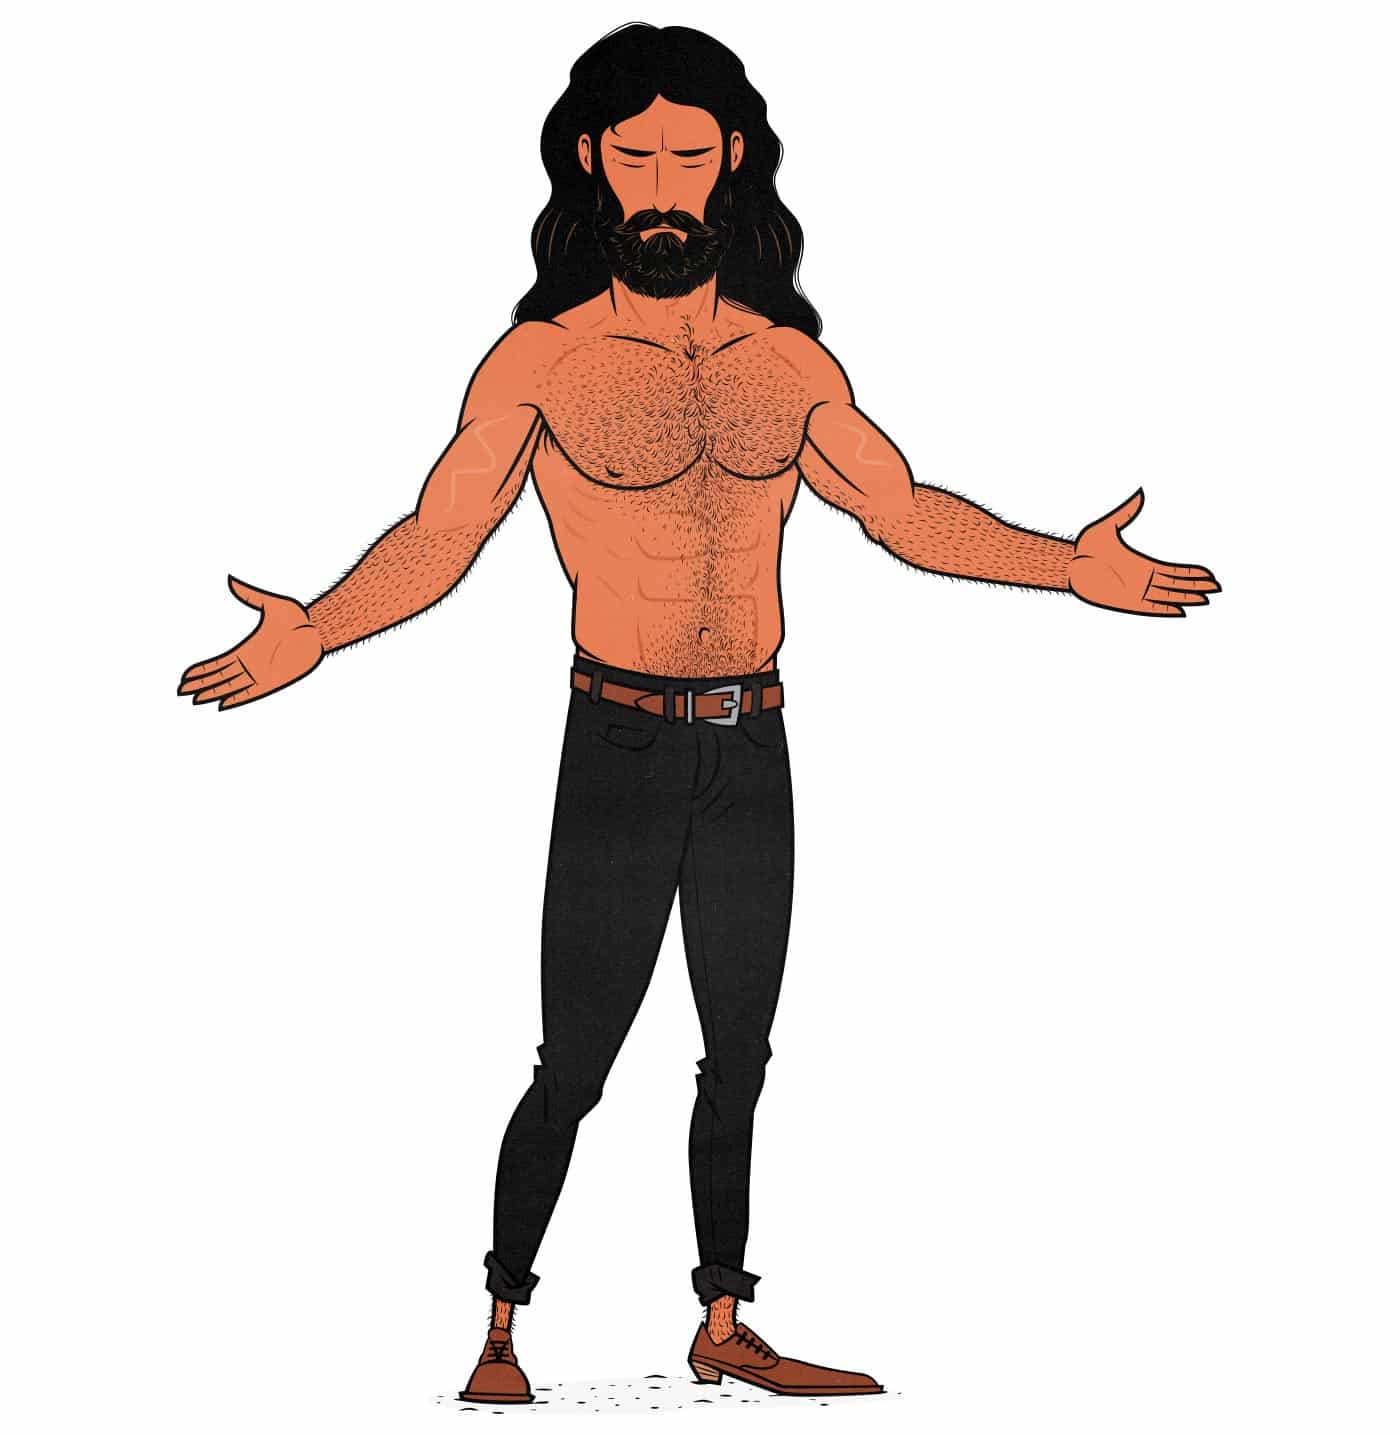 Illustration showing the ideal body proportions for an aesthetic Hollywood Physique